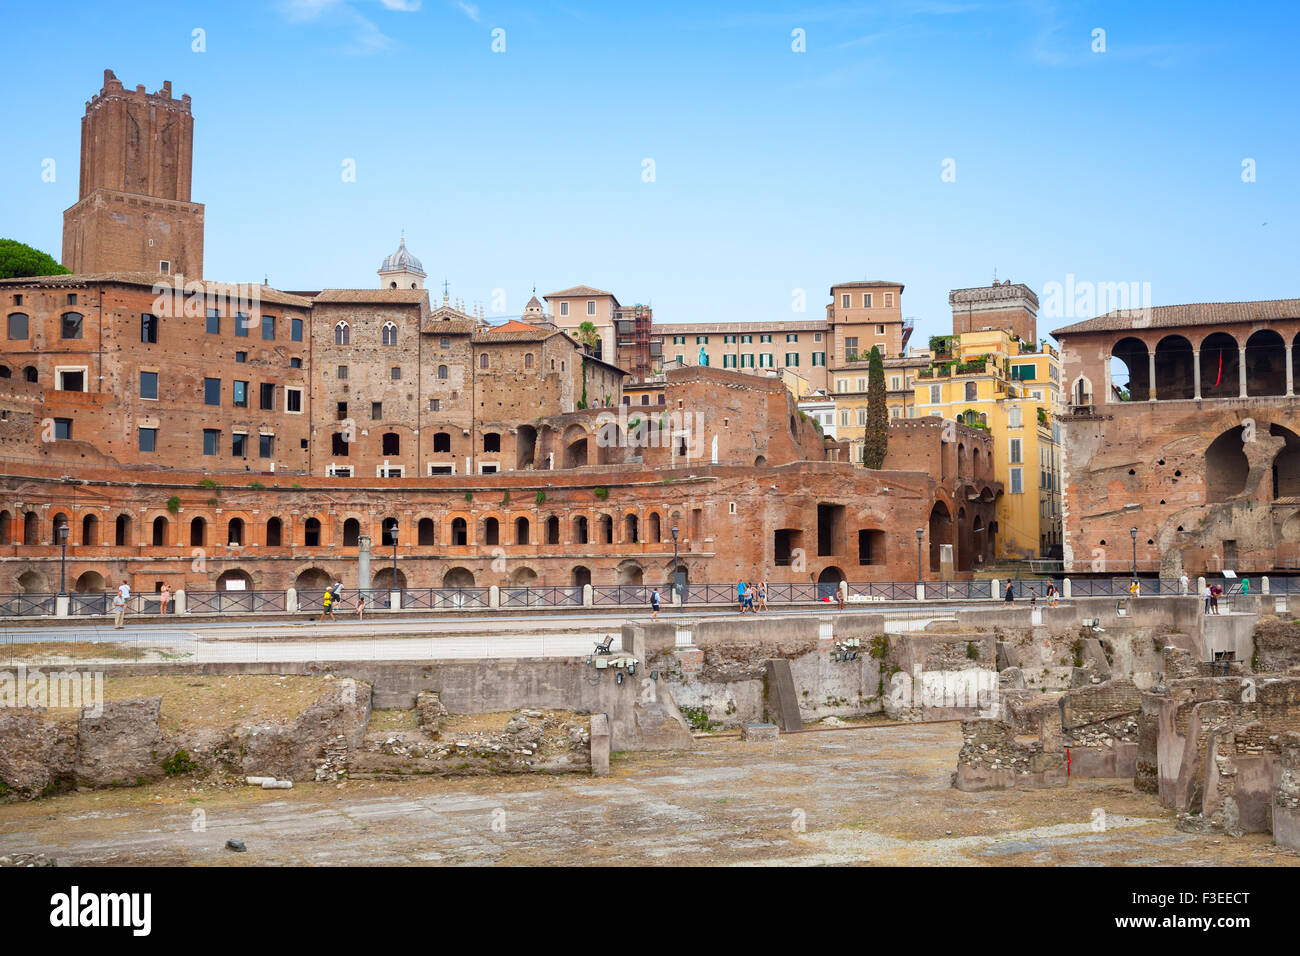 Ruined remains of ancient Imperial forums in Rome Italy Stock Photo